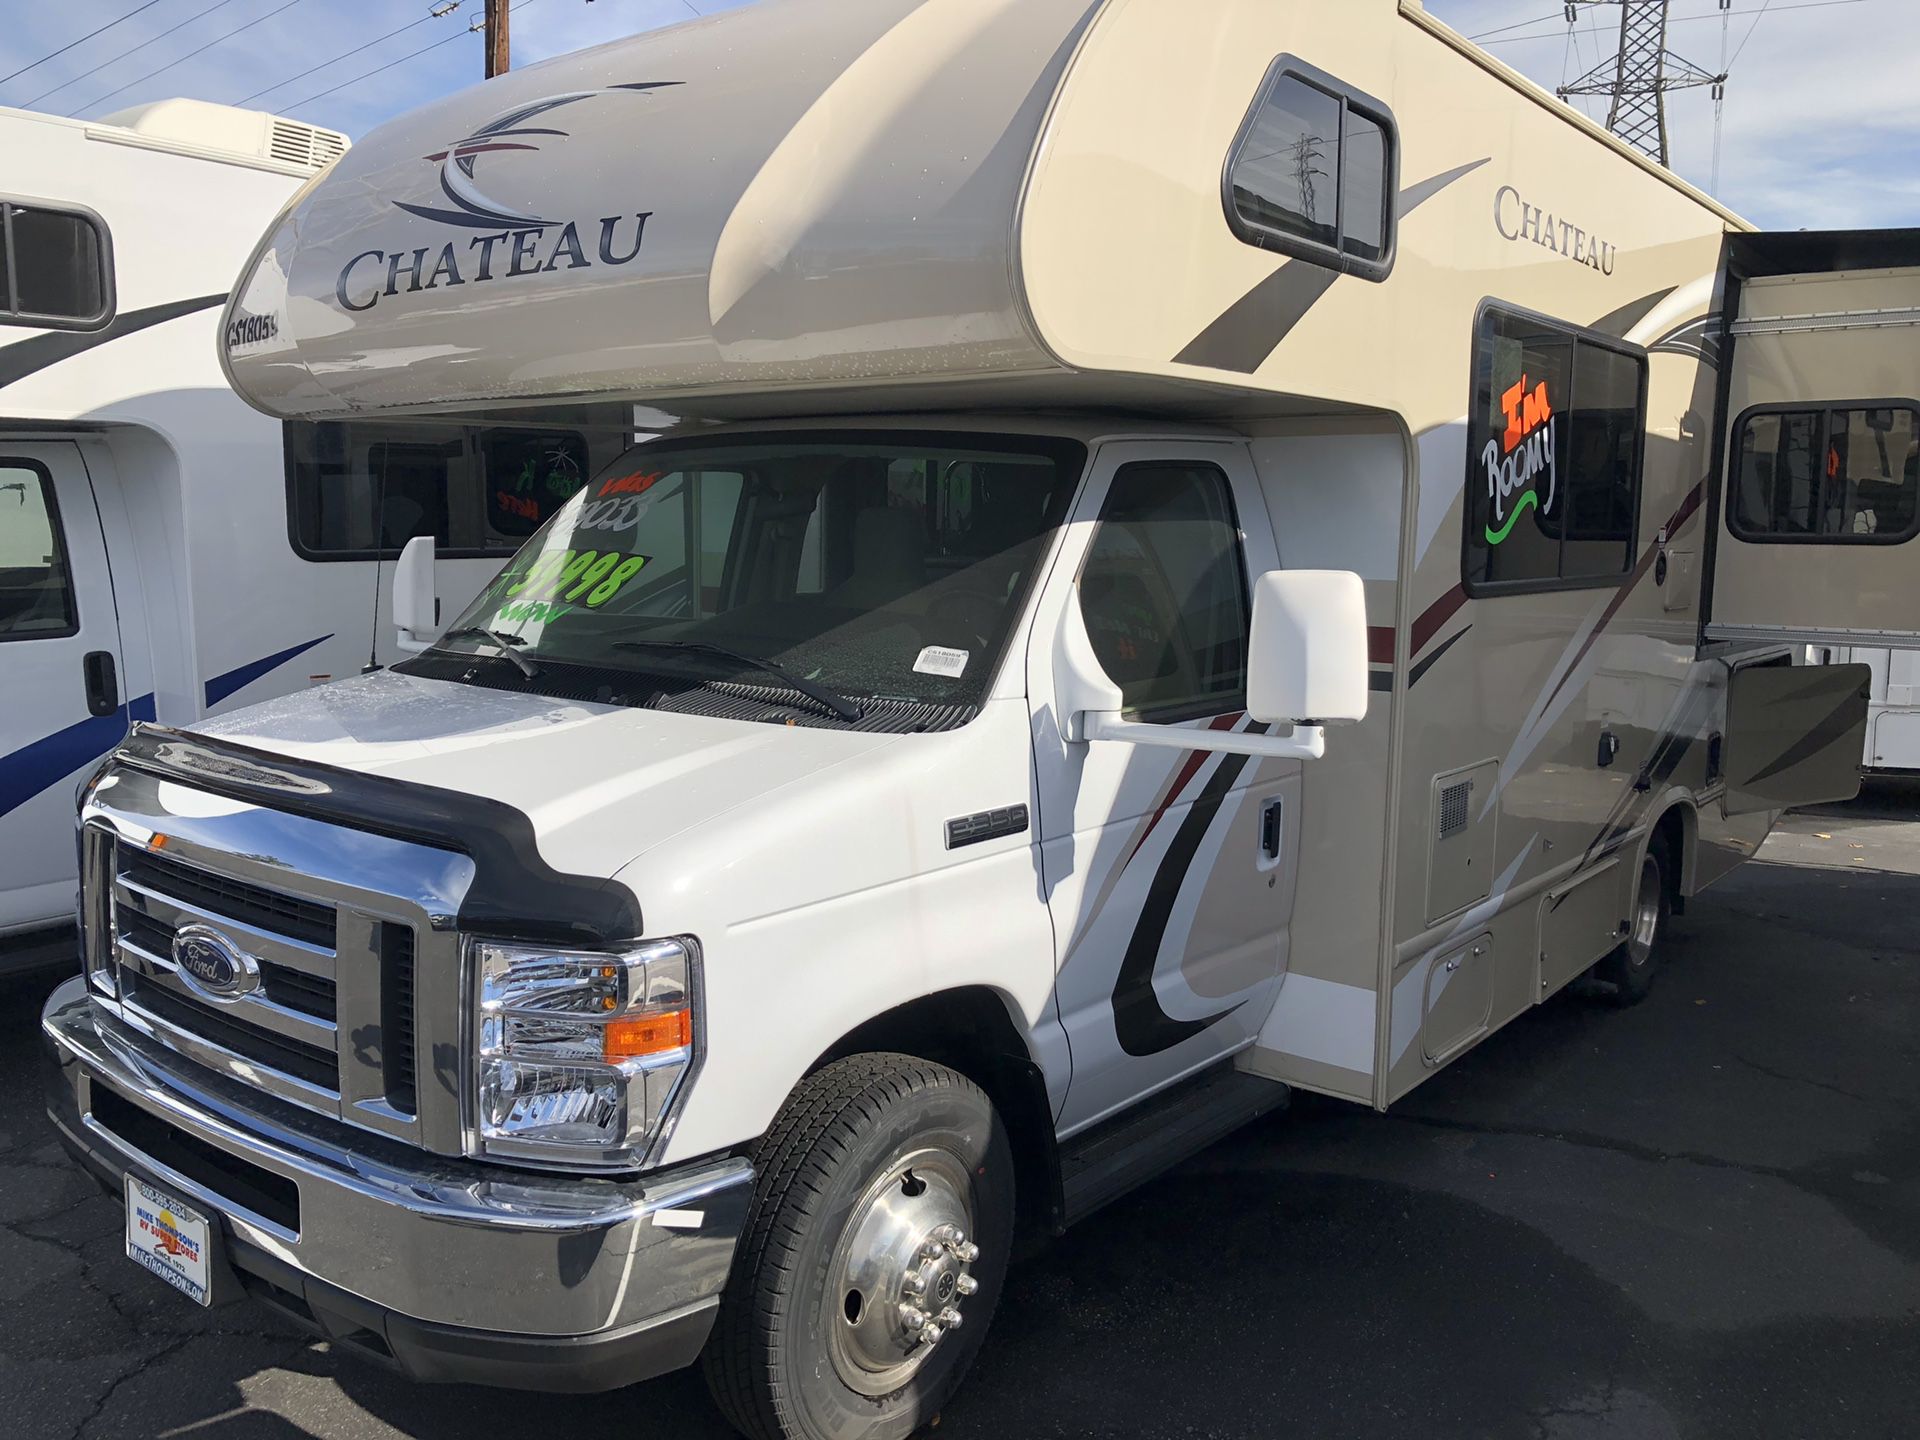 New 2018 22ft class C motorhome with bedroom slide out. Reduced!